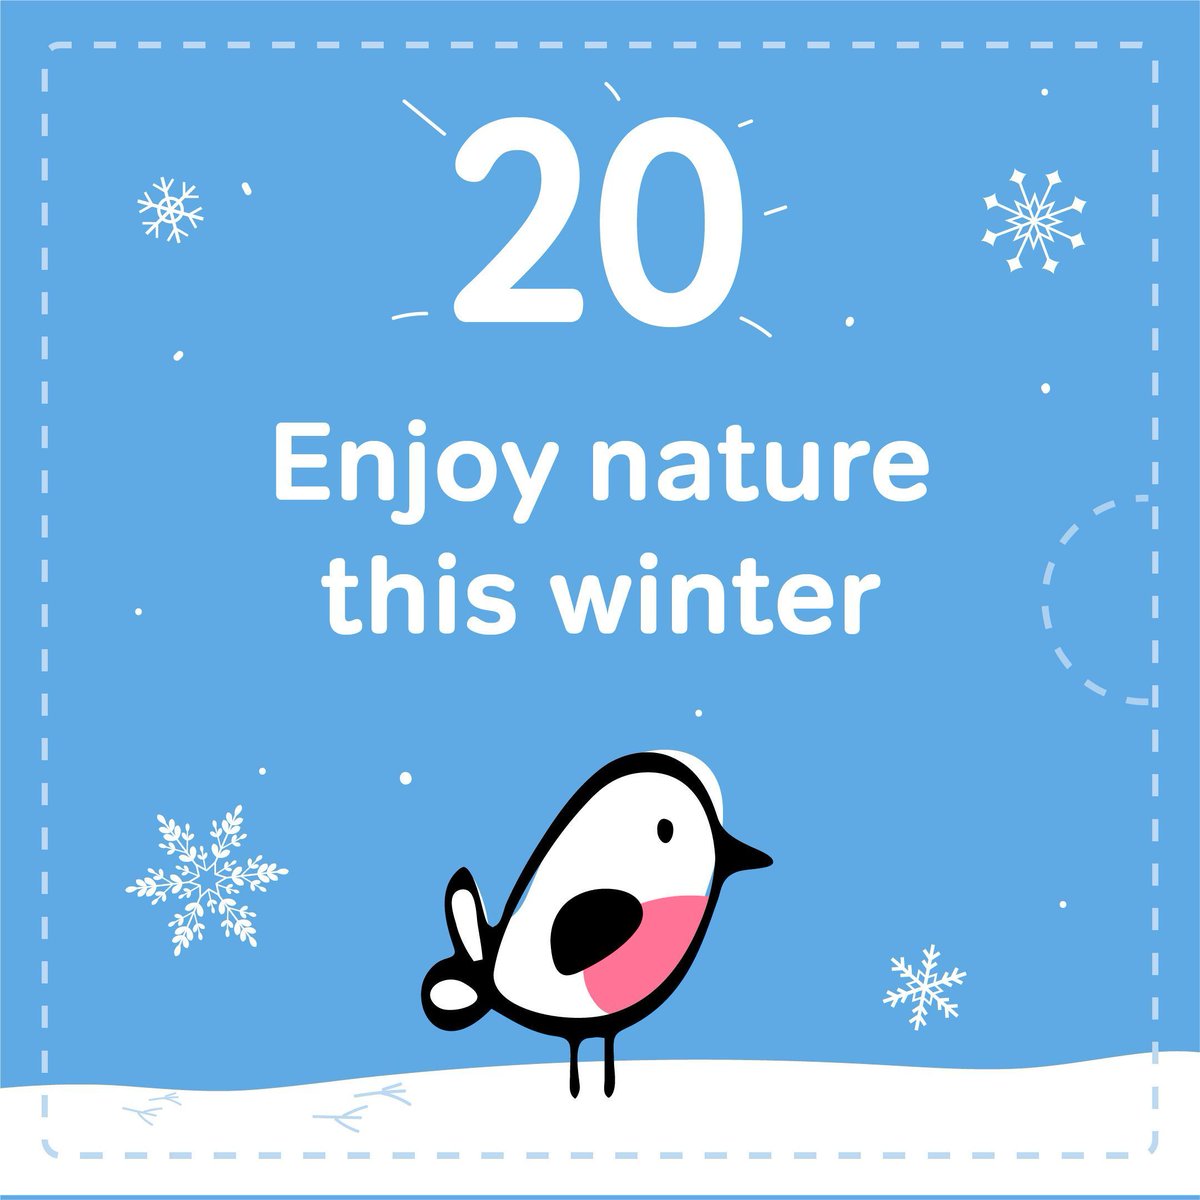 Enjoying the outdoors, even in the #winter, can give our mood a boost. Look for local walking groups, explore your nearest @LeedsParks or nature reserve. Find ideas for green spaces on #MindWell: buff.ly/3Ri6Gt1 #MindWellAdventCalendar #FestiveSeasonYourWay #MindfulWalk